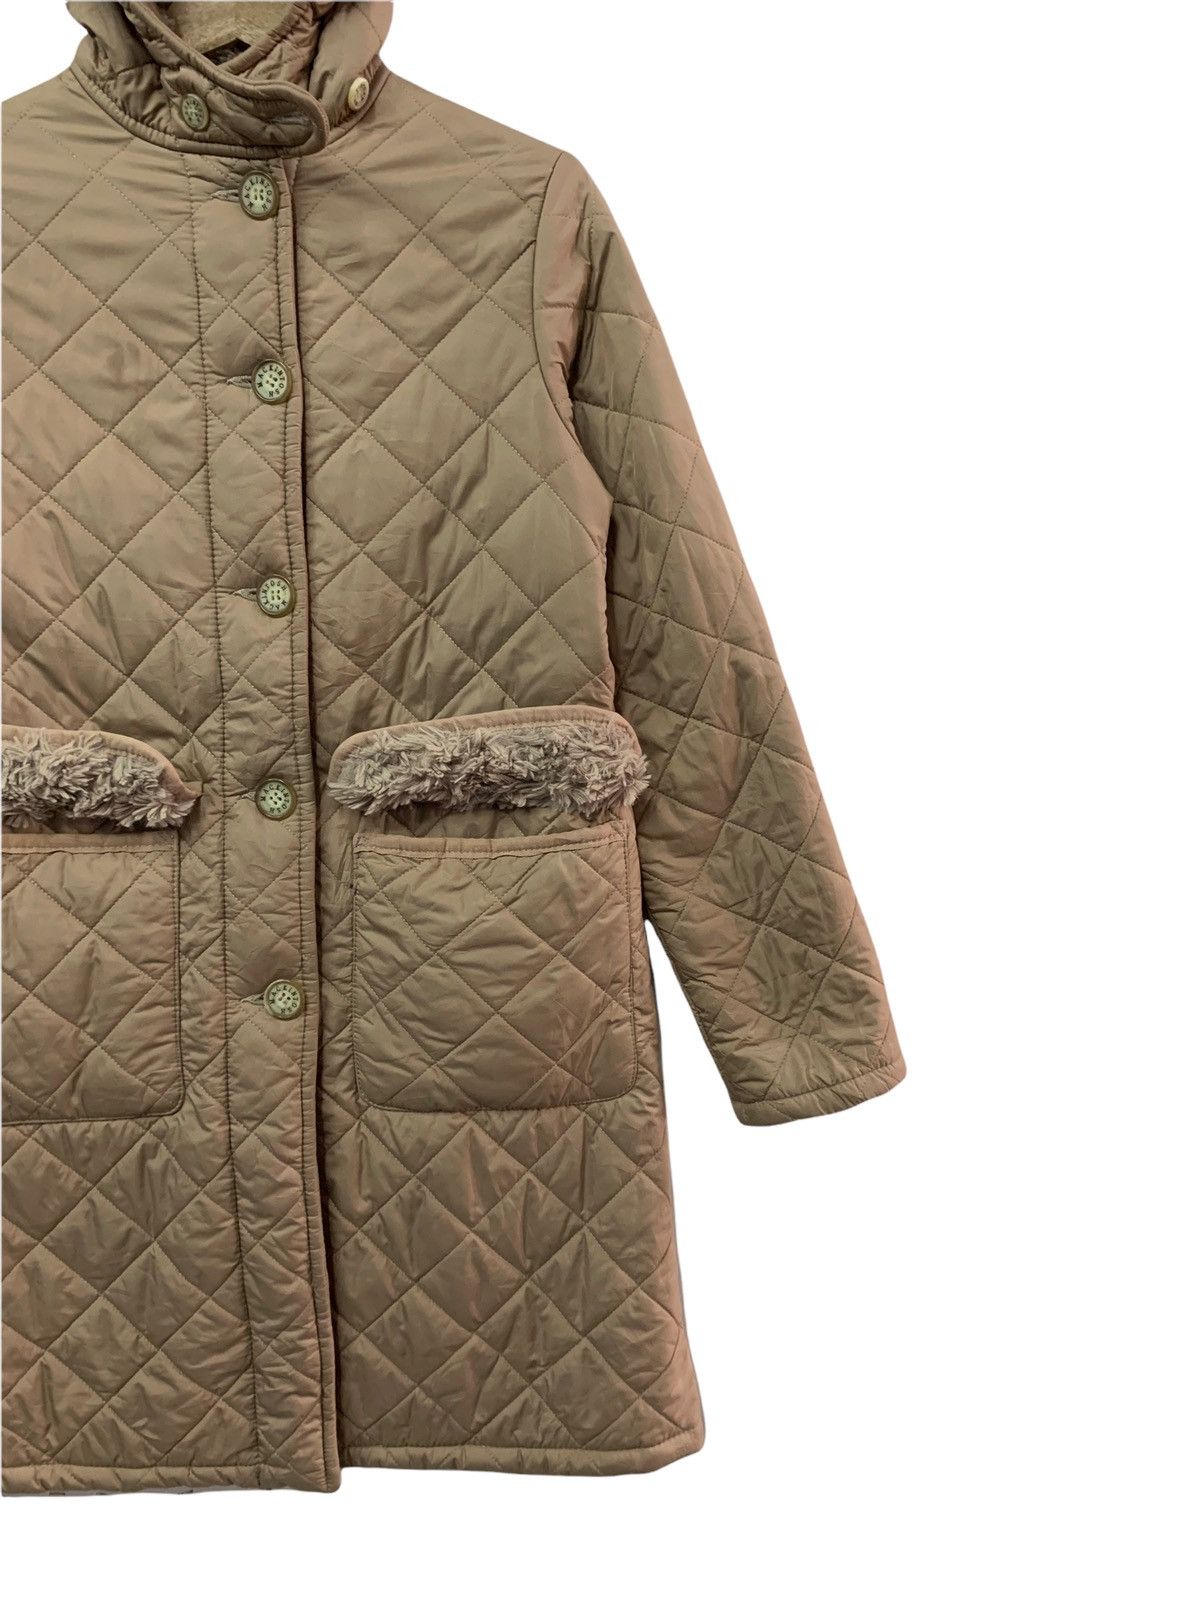 🔥MACKINTOSH SCOTLAND QUILTED FUR LINED LONG JACKETS - 5